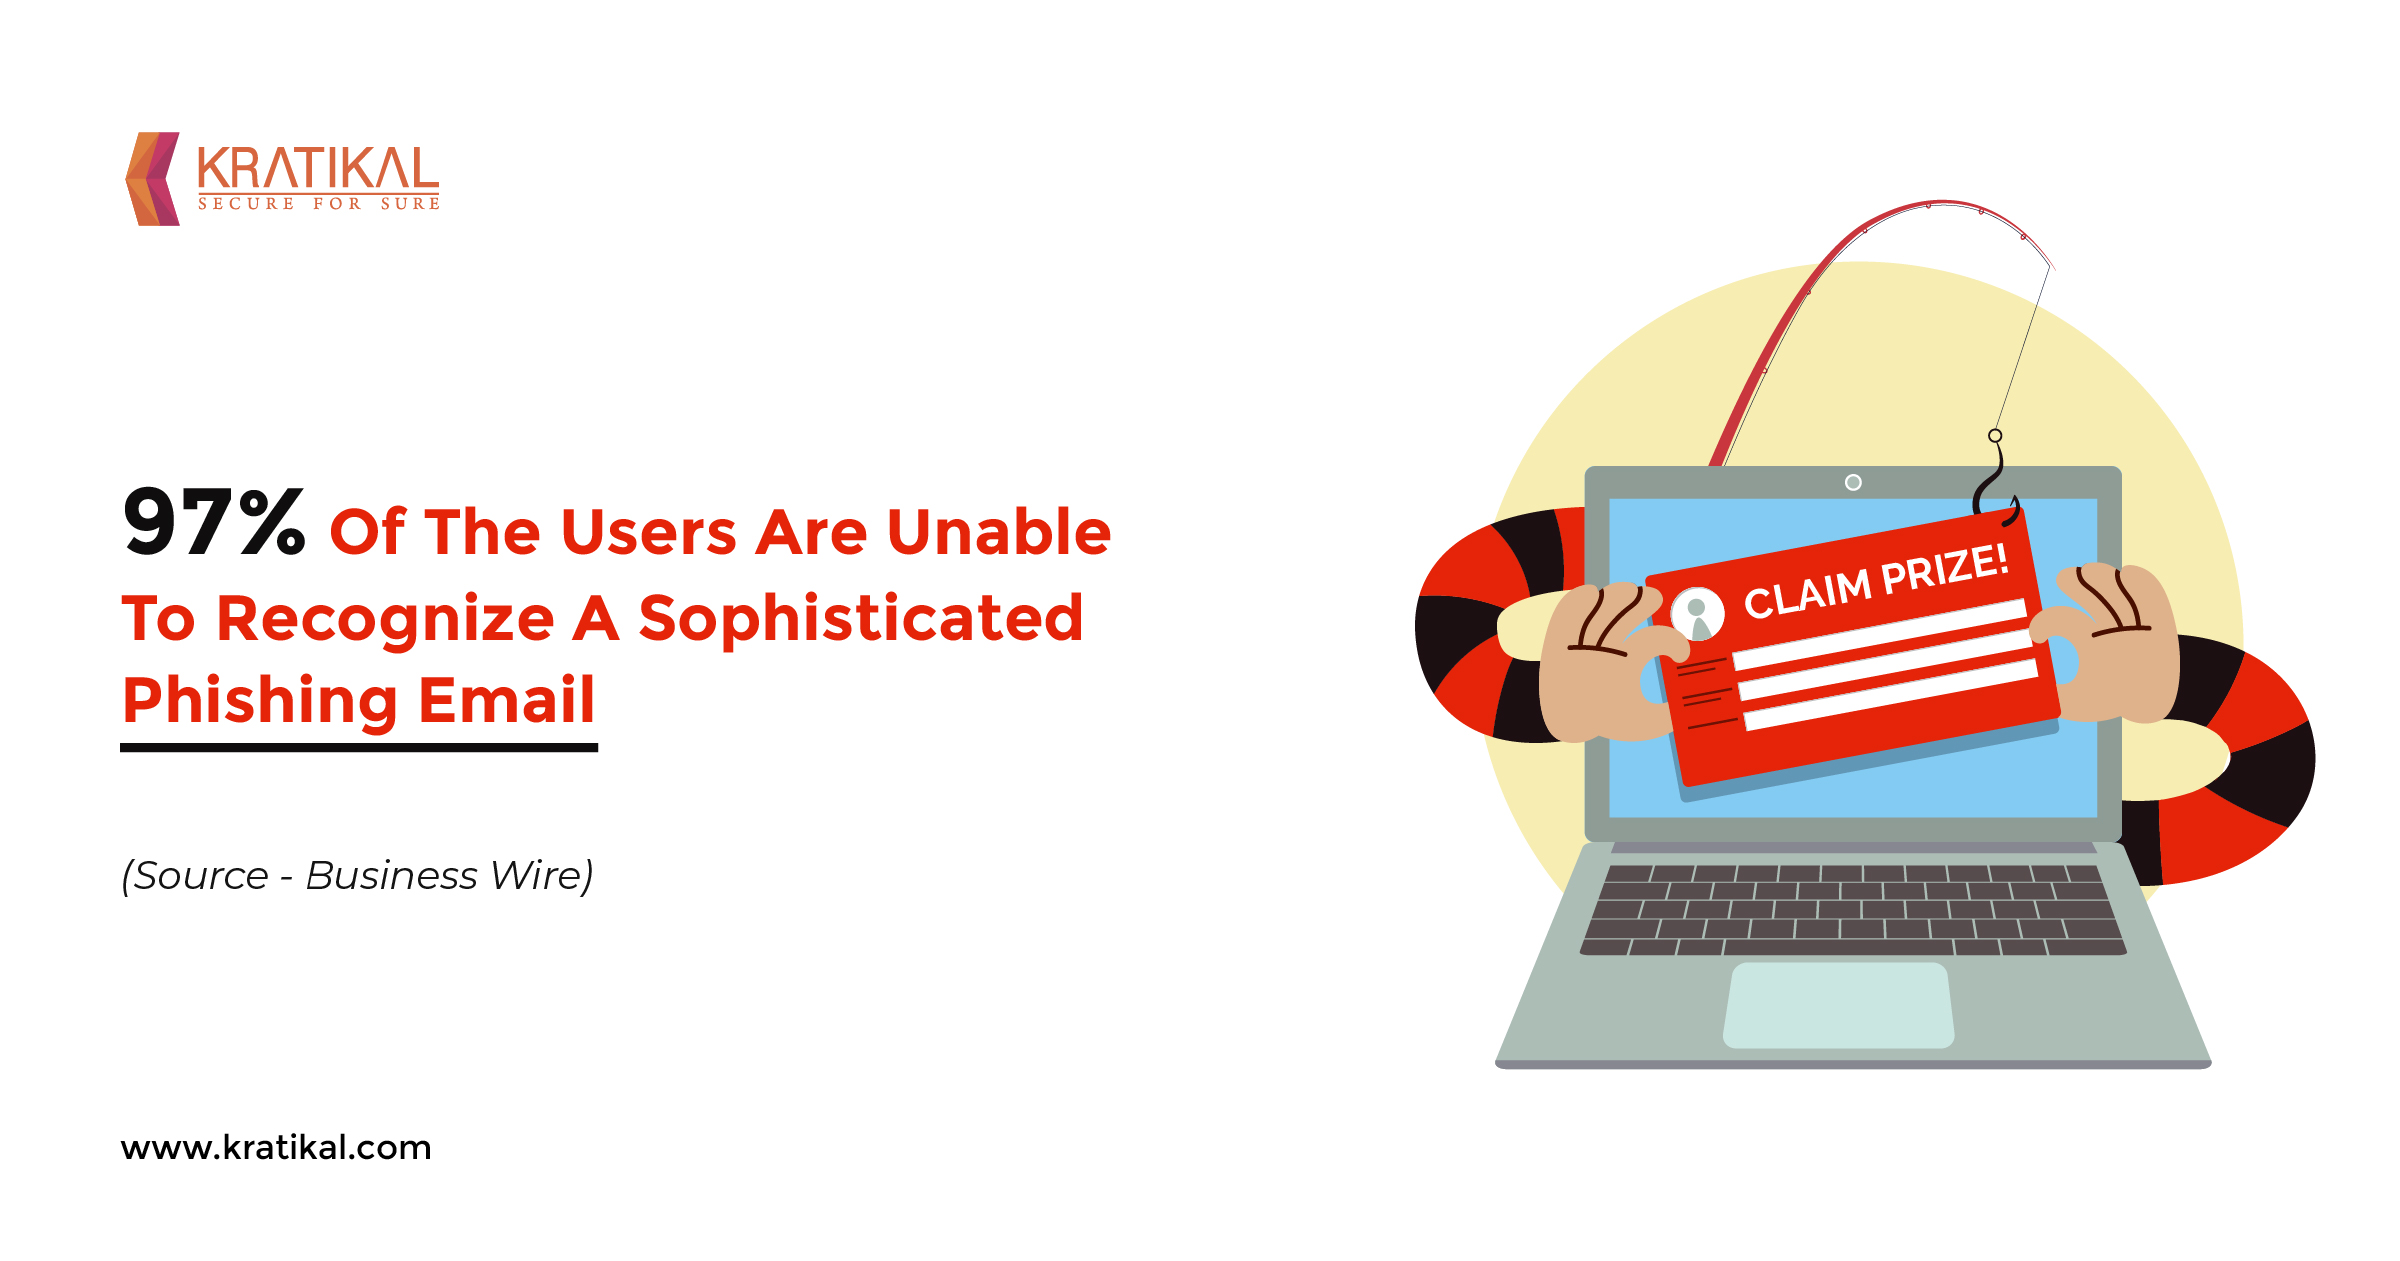 97% of the users are unable to recognize a sophisticated phishing email